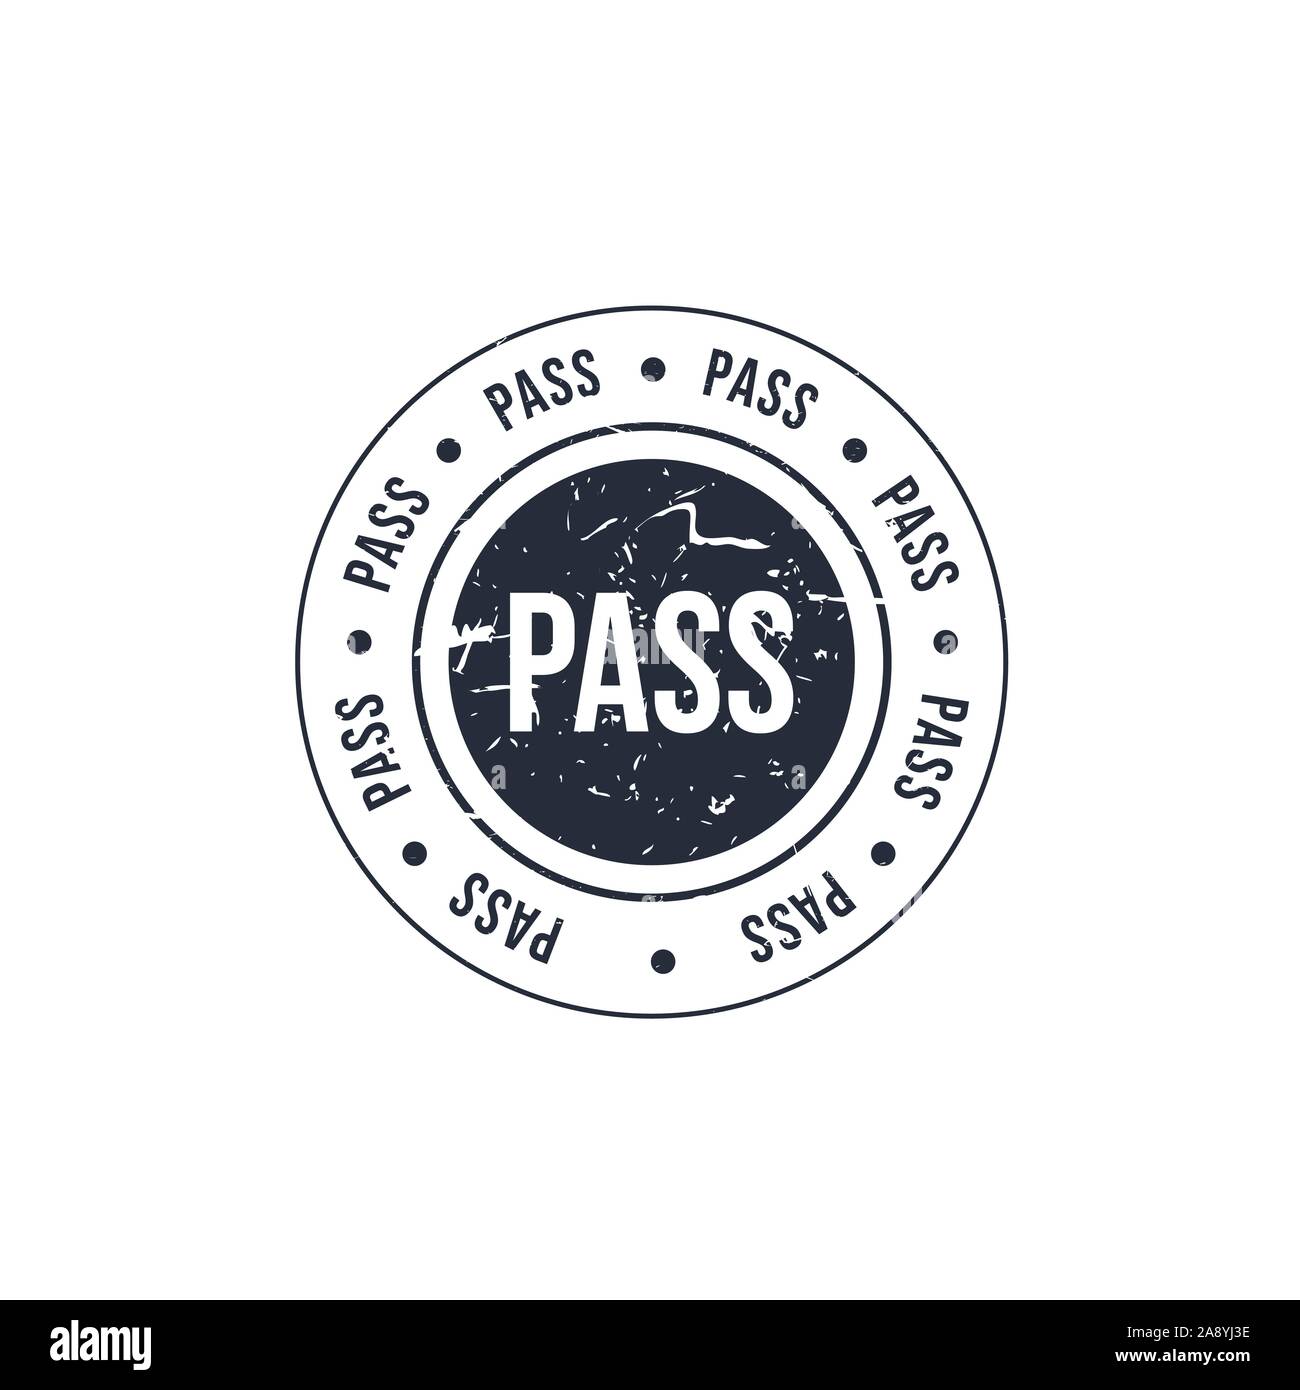 Pass or passed grunge rubber stamp. Vector illustration on white background. Stock Vector